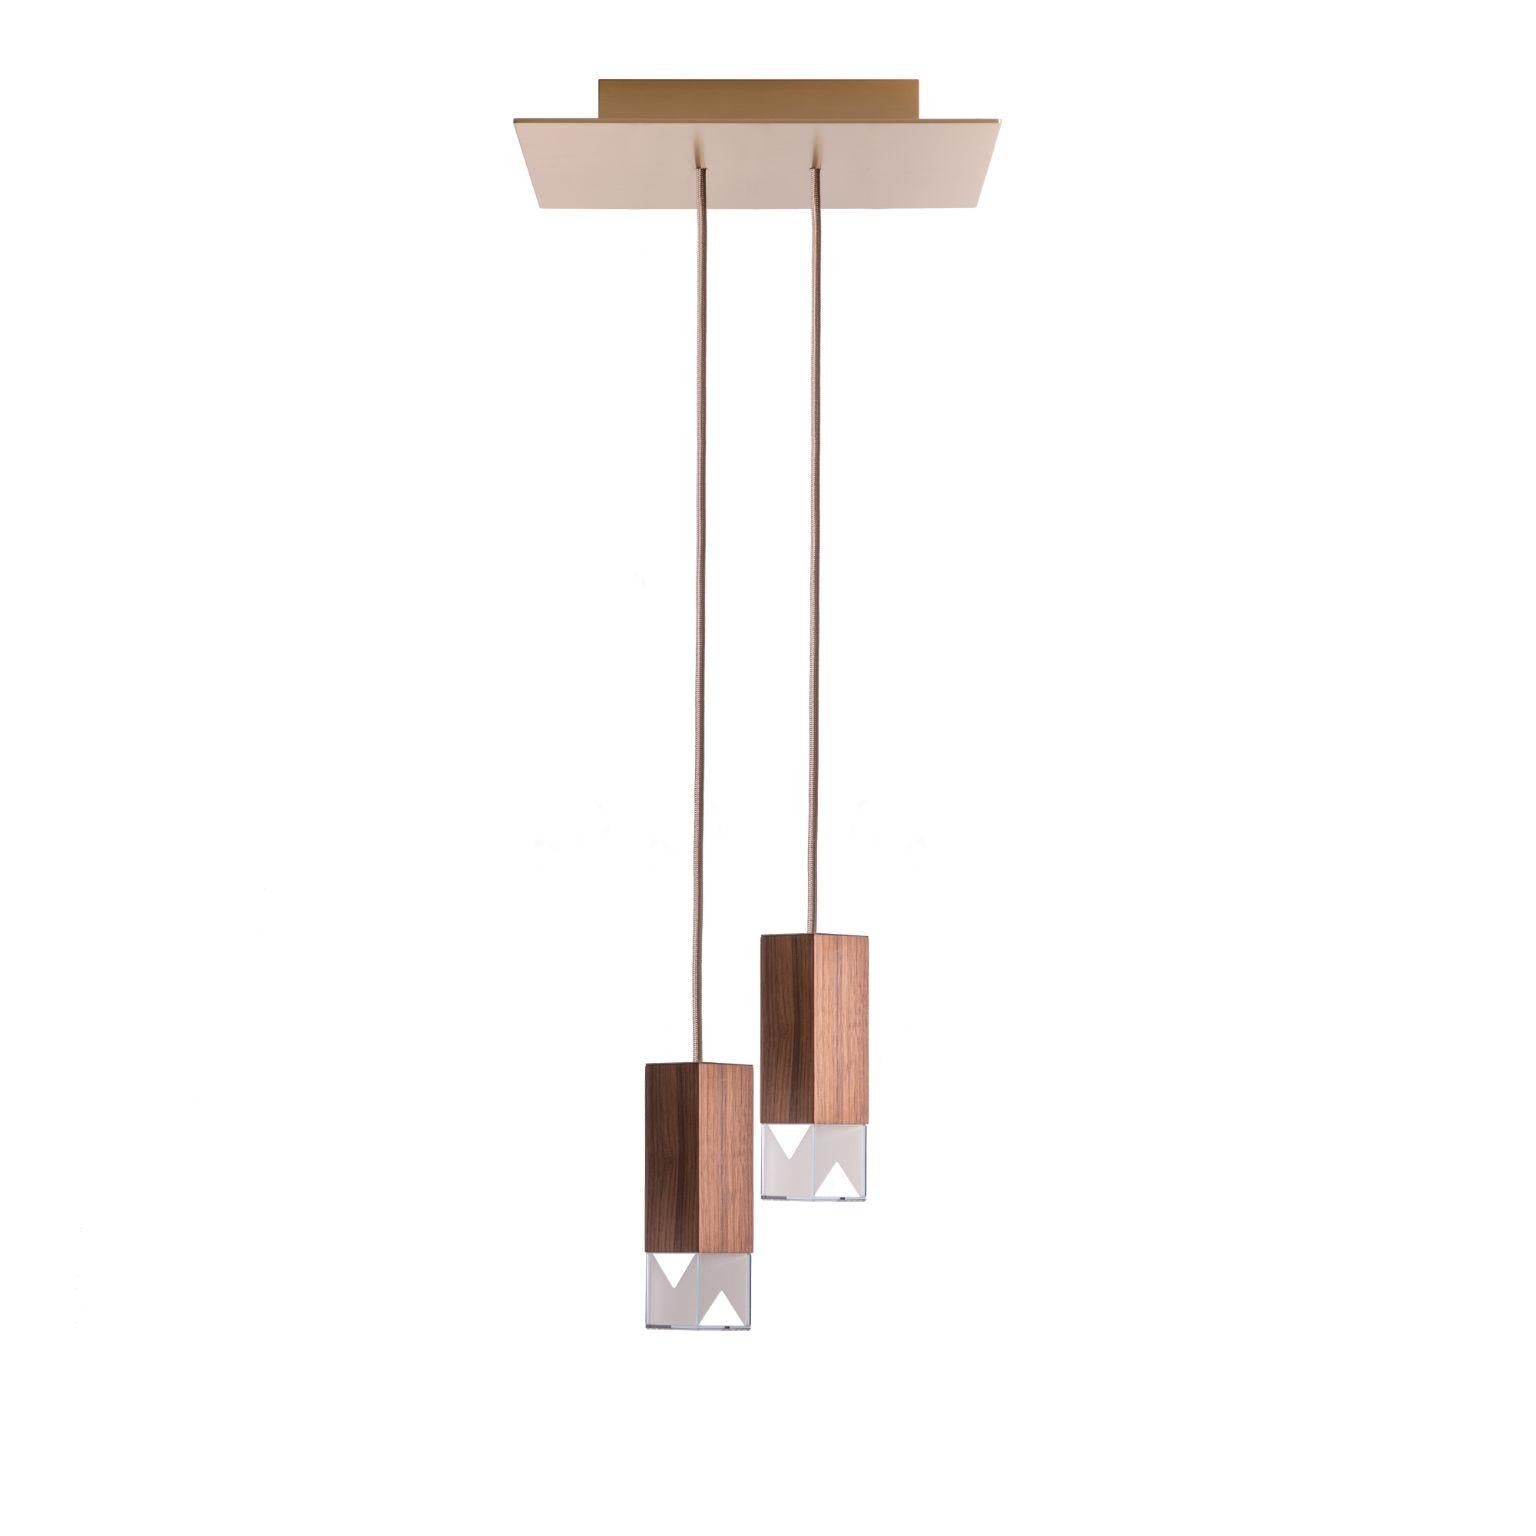 Lamp one wood duet chandelier by Formaminima
Dimensions: D30 x W30 x H 68 cm (adjustable height).
Materials: Body lamps: handcrafted solid Canaletto walnut wood, matt oil finish
Crystal diffusers, Limoges biscuit-finish porcelain sheets.
Ceiling